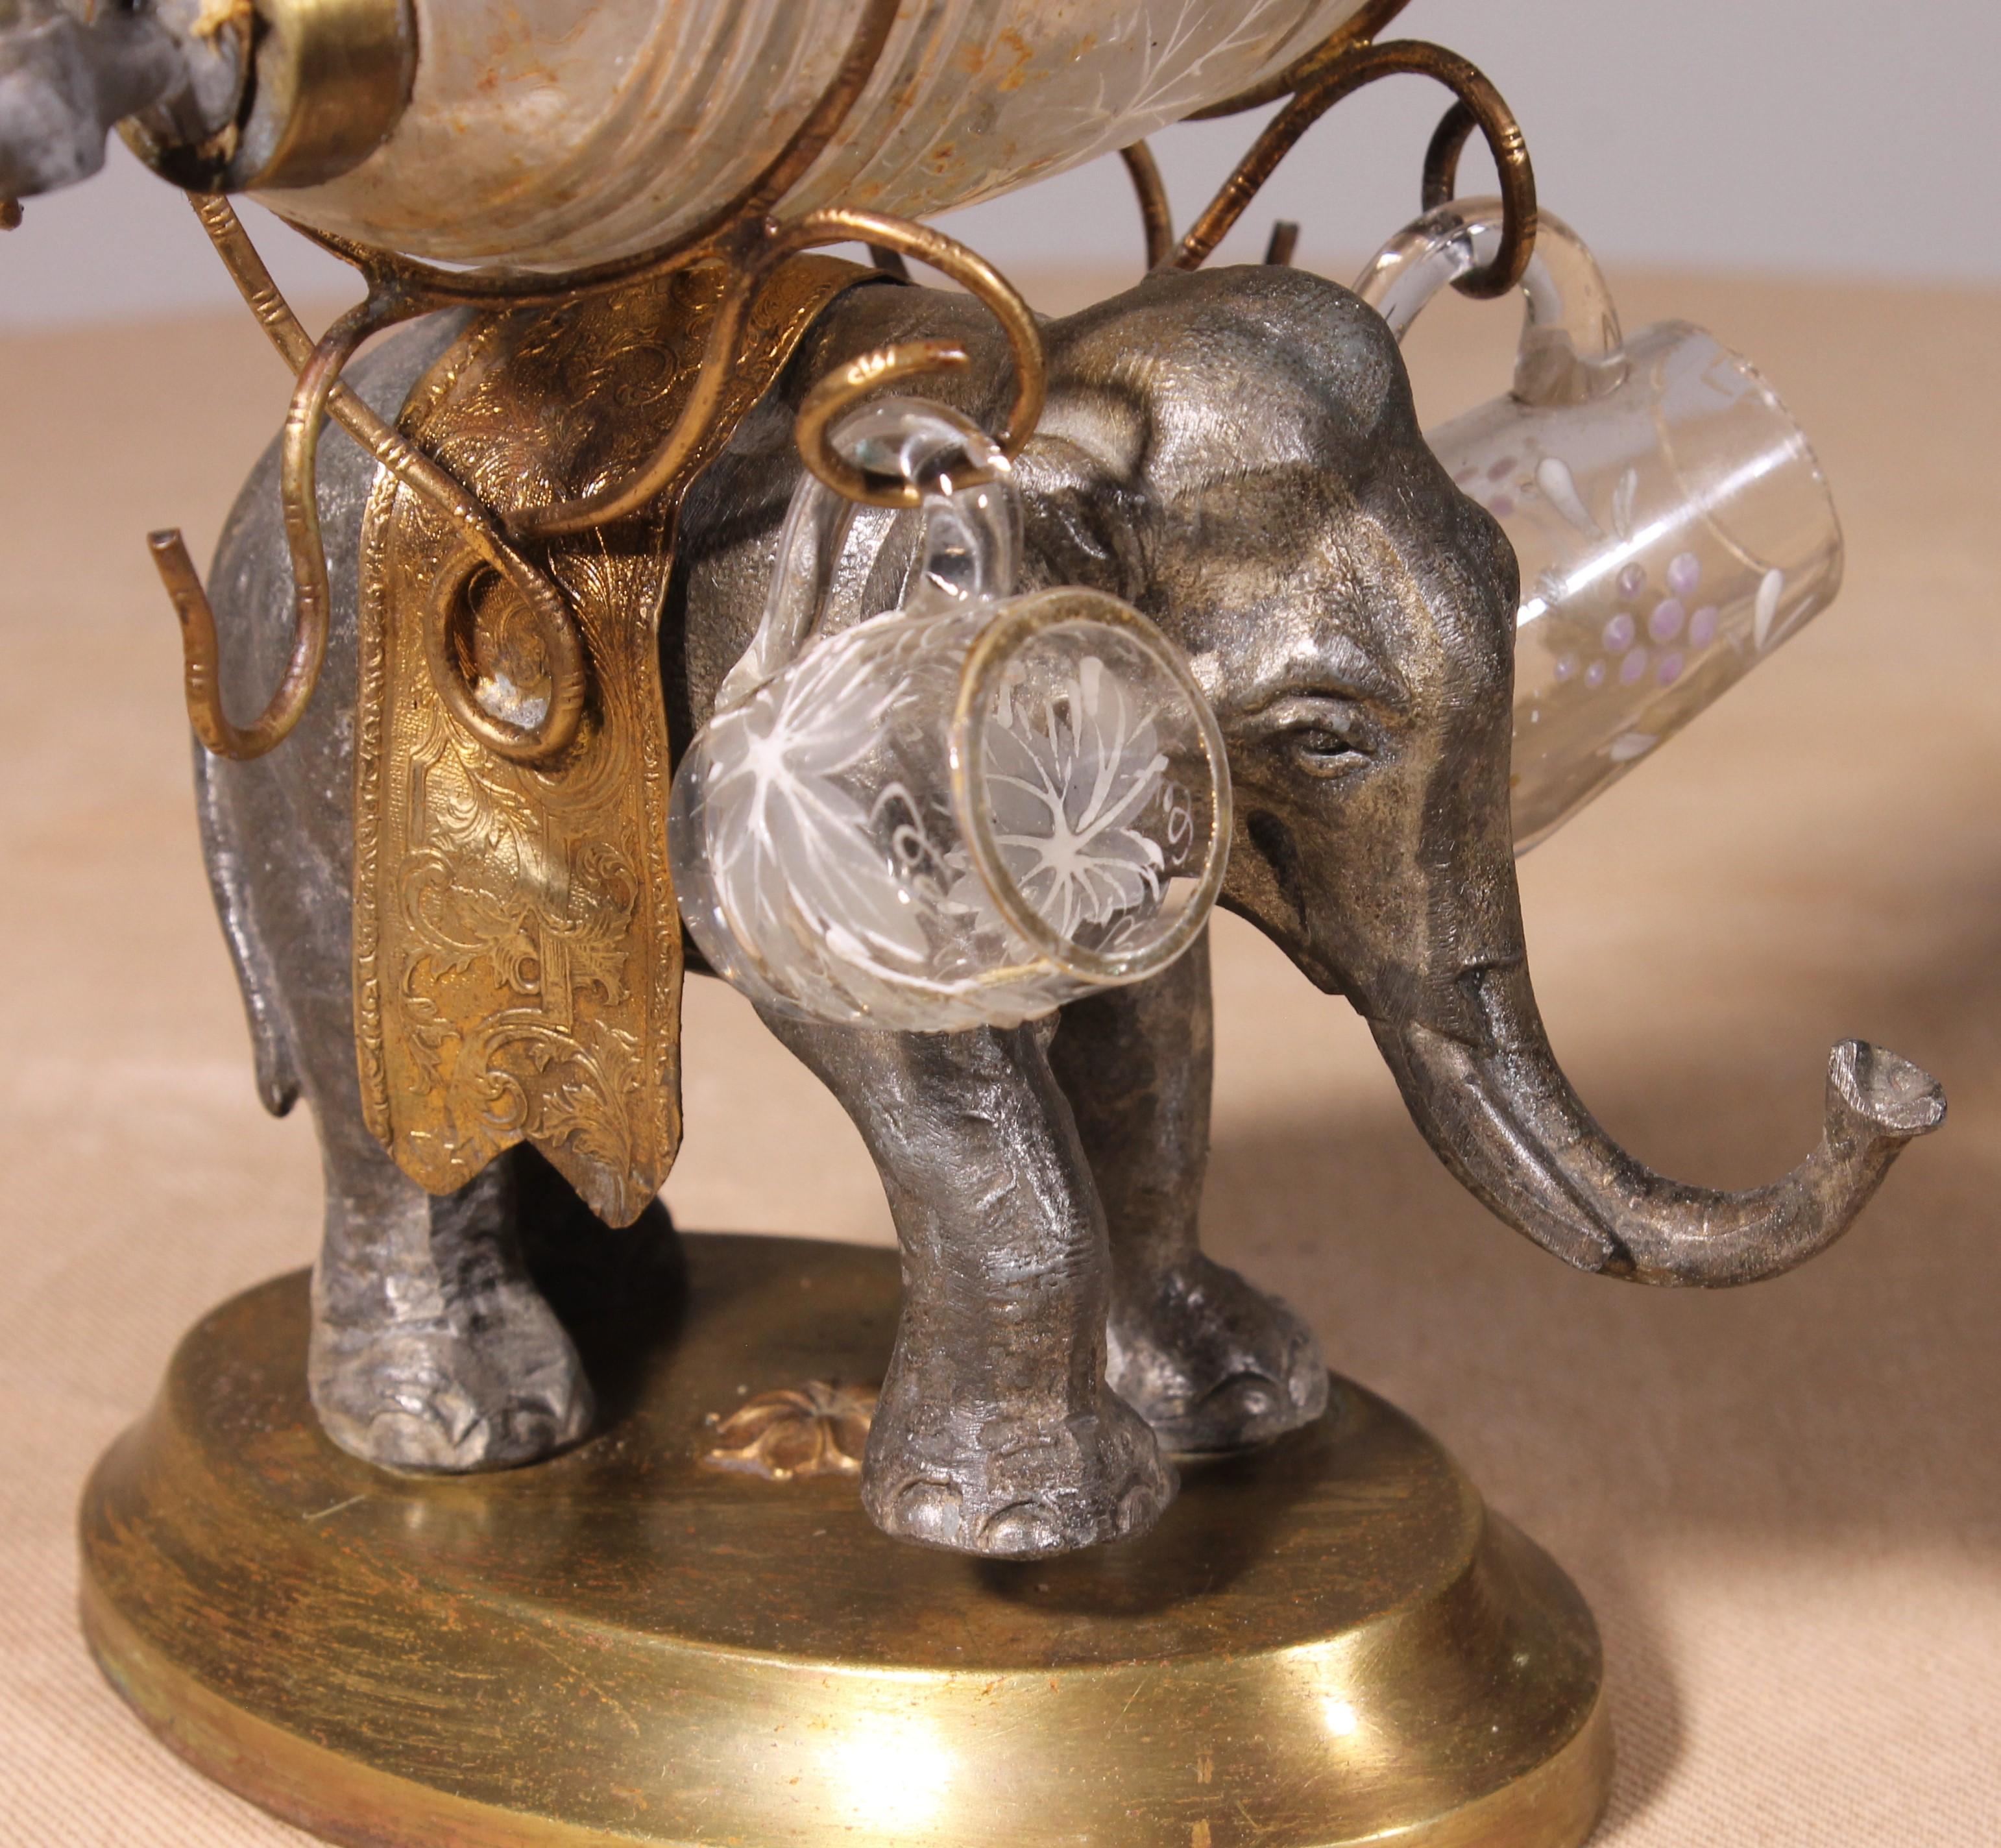 Liqueur cellar with an elephant in spelter, brass and enameled glassware from the Napoleon III period

Beautiful liqueur cellar with a very beautiful elephant decorated with a chiseled brass cape

The elephant is topped with a glass barrel decorated